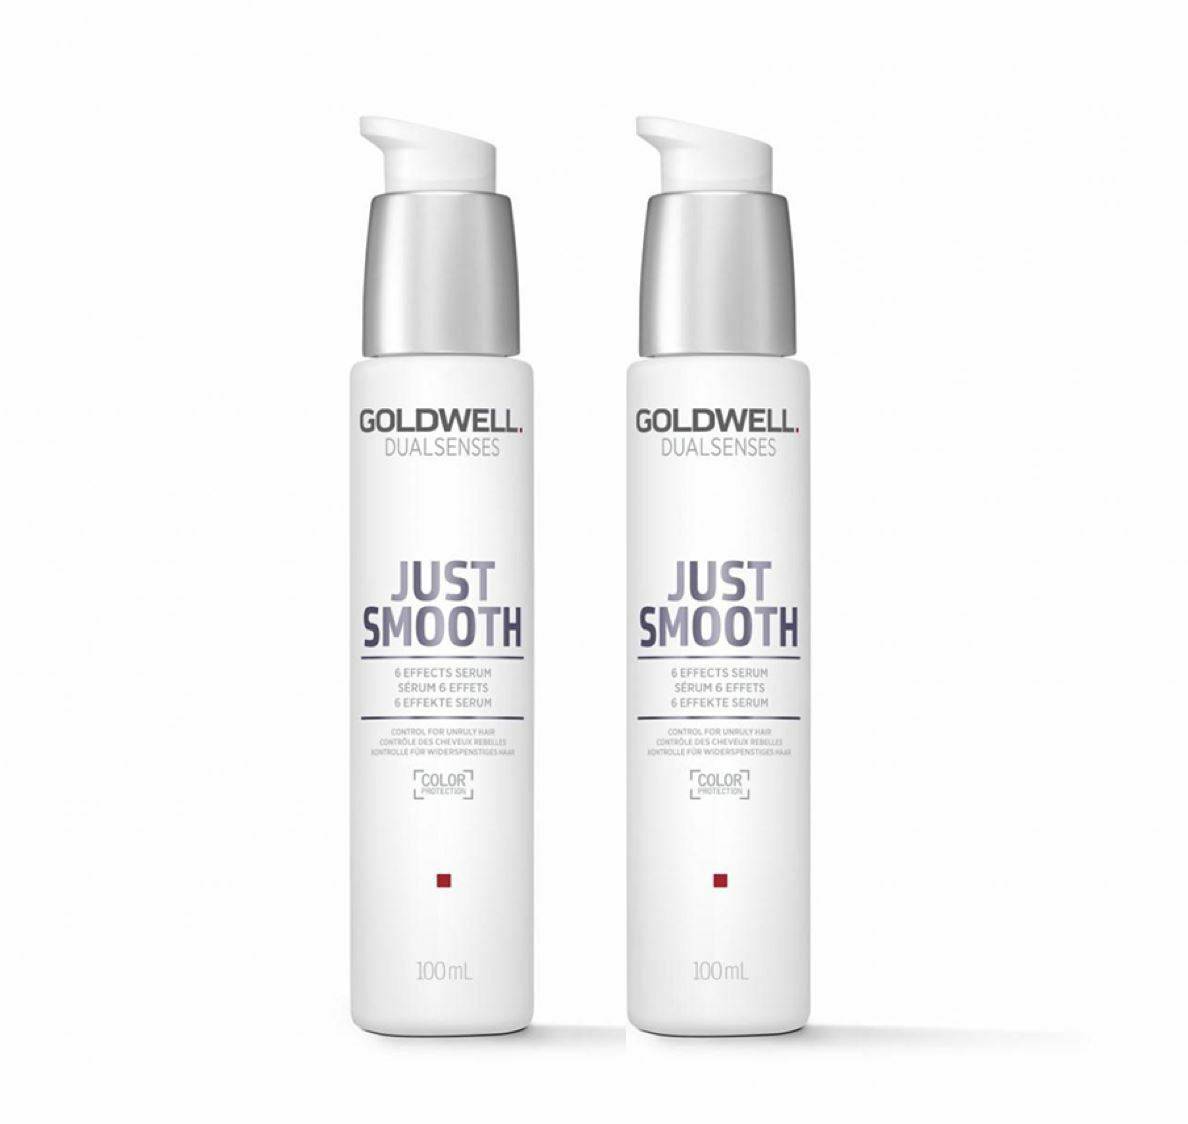 Goldwell Just Smooth 6 effects Serum 100 ml x 2 - On Line Hair Depot